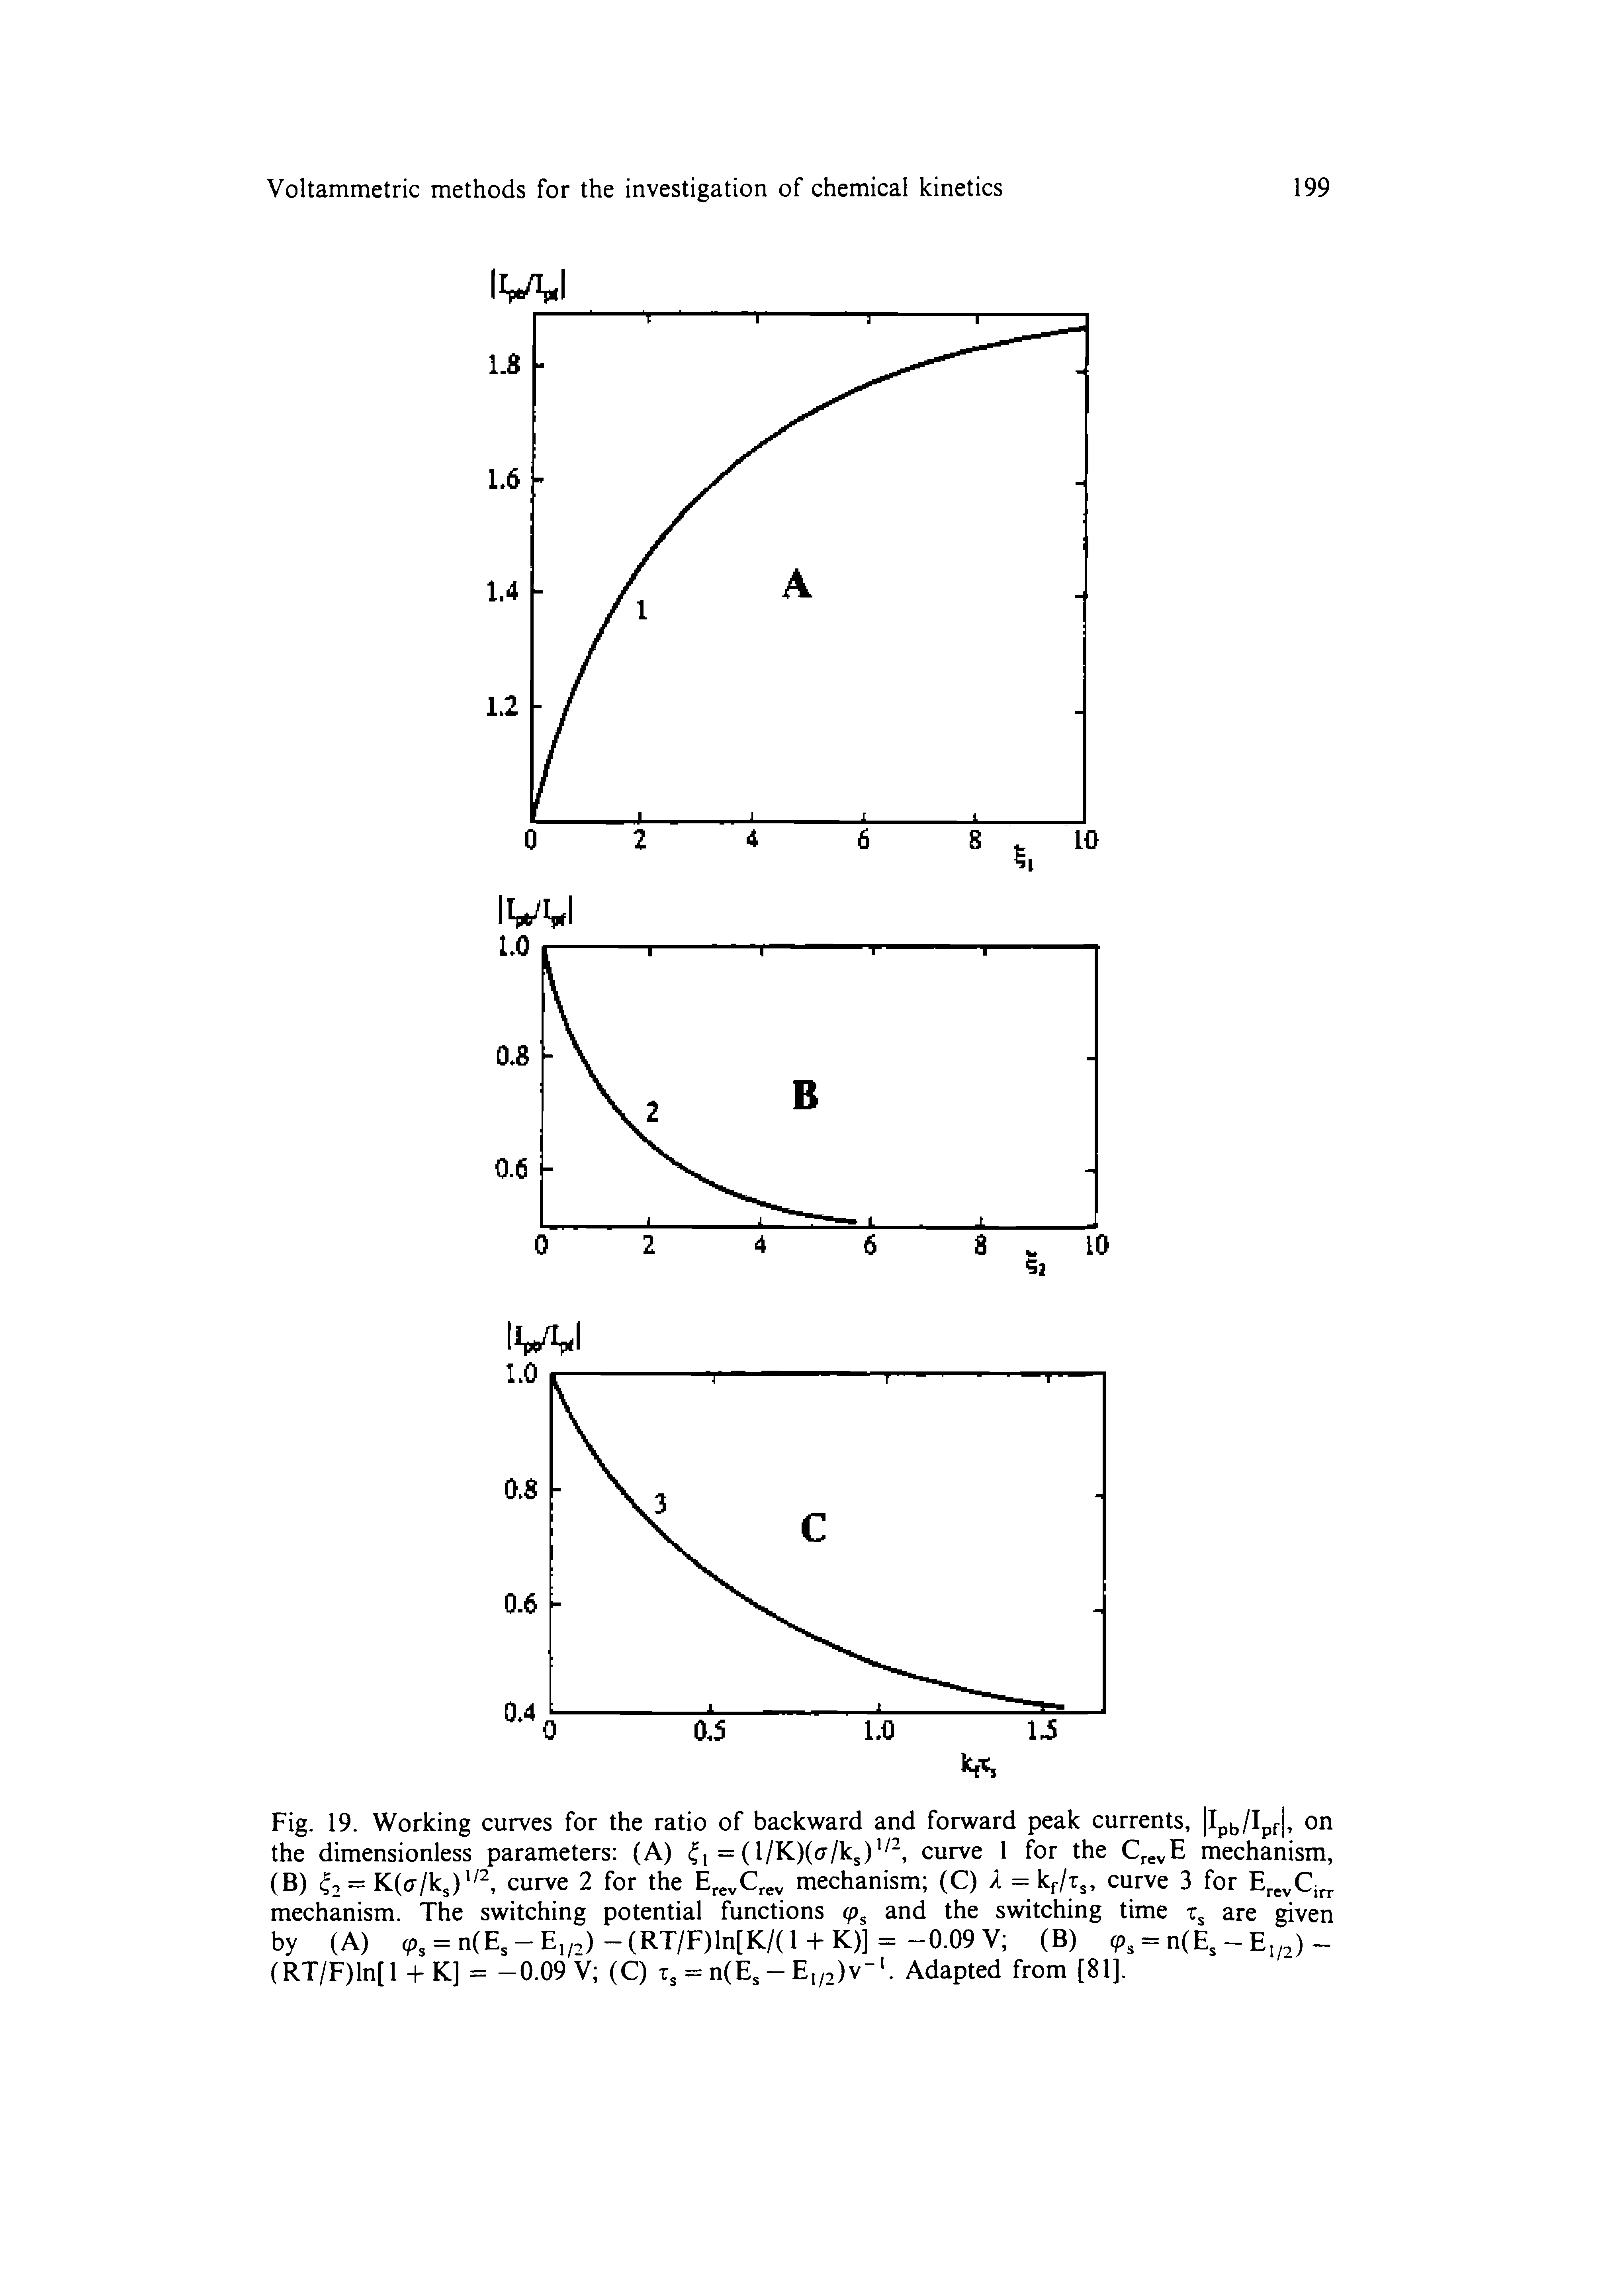 Fig. 19. Working curves for the ratio of backward and forward peak currents, Ipij/Ipf, on the dimensionless parameters (A) = (l/K)((r/ks) -, curve 1 for the QevE mechanism,...